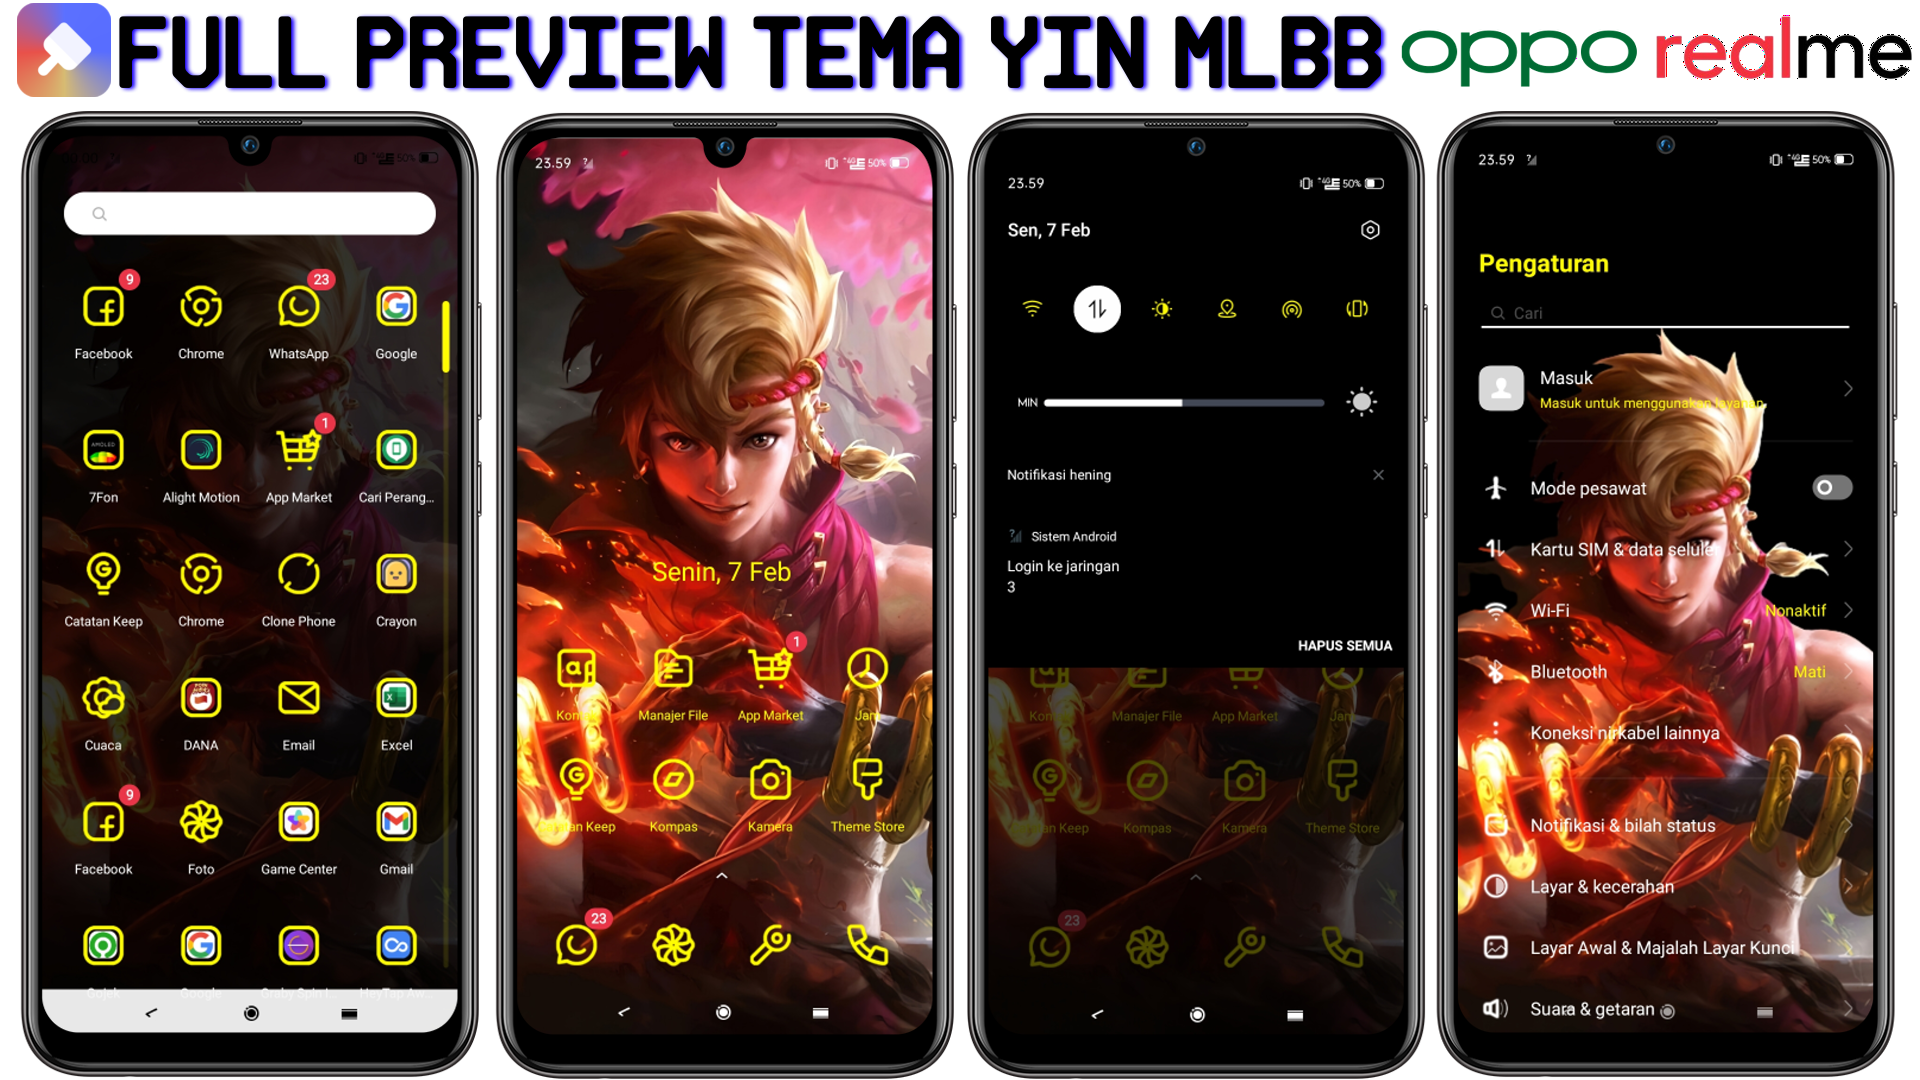 themes Yin mobile legends for oppo & realme